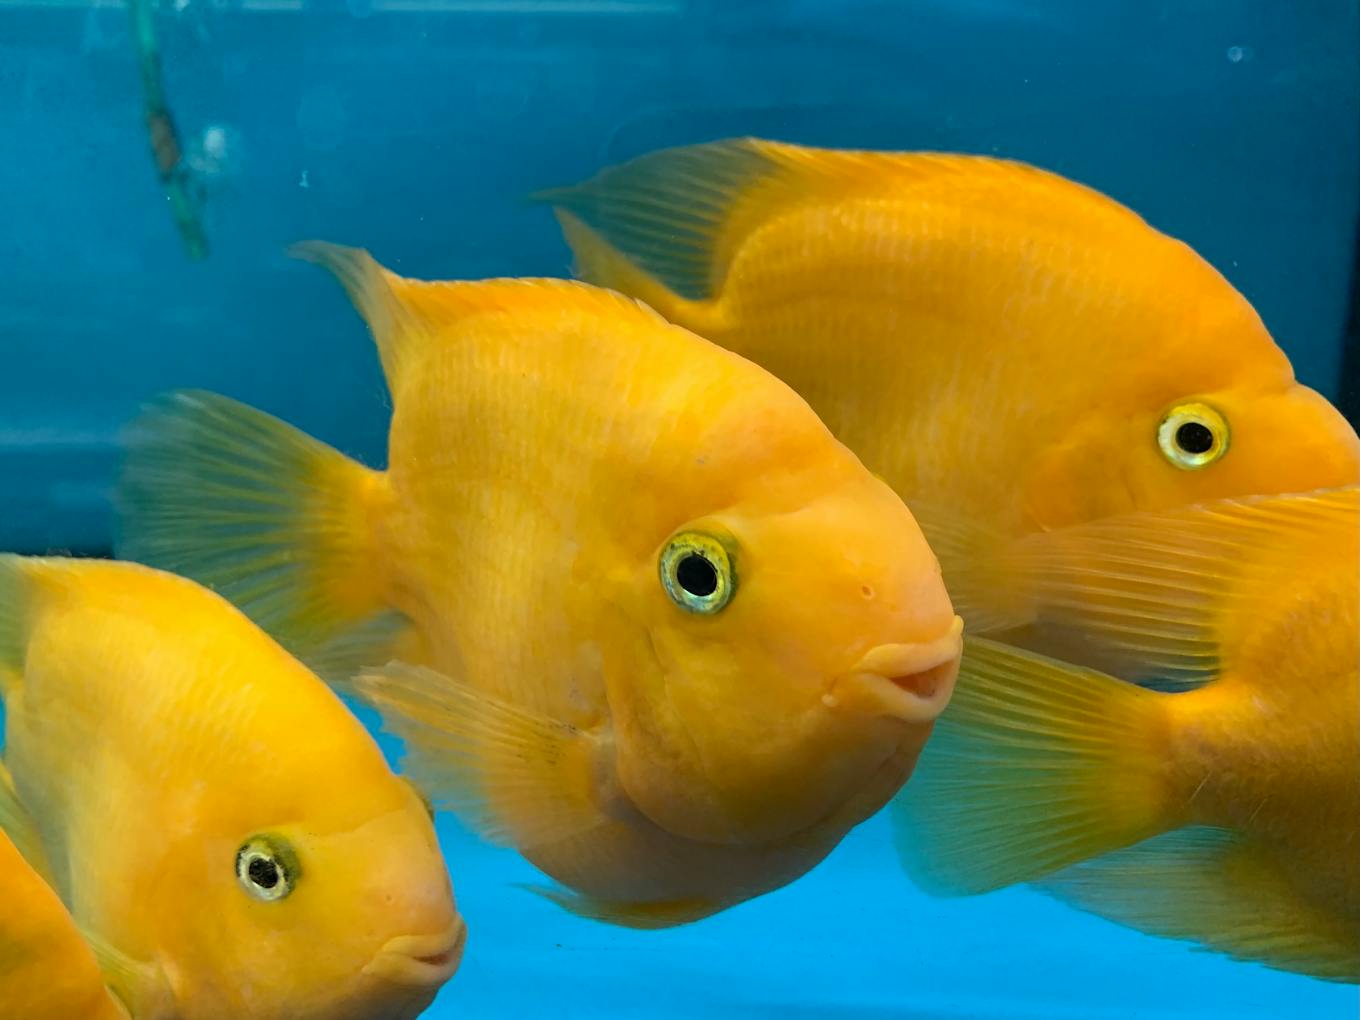 Fish have been known to have long-term memories, exhibit culture and build complex nests.